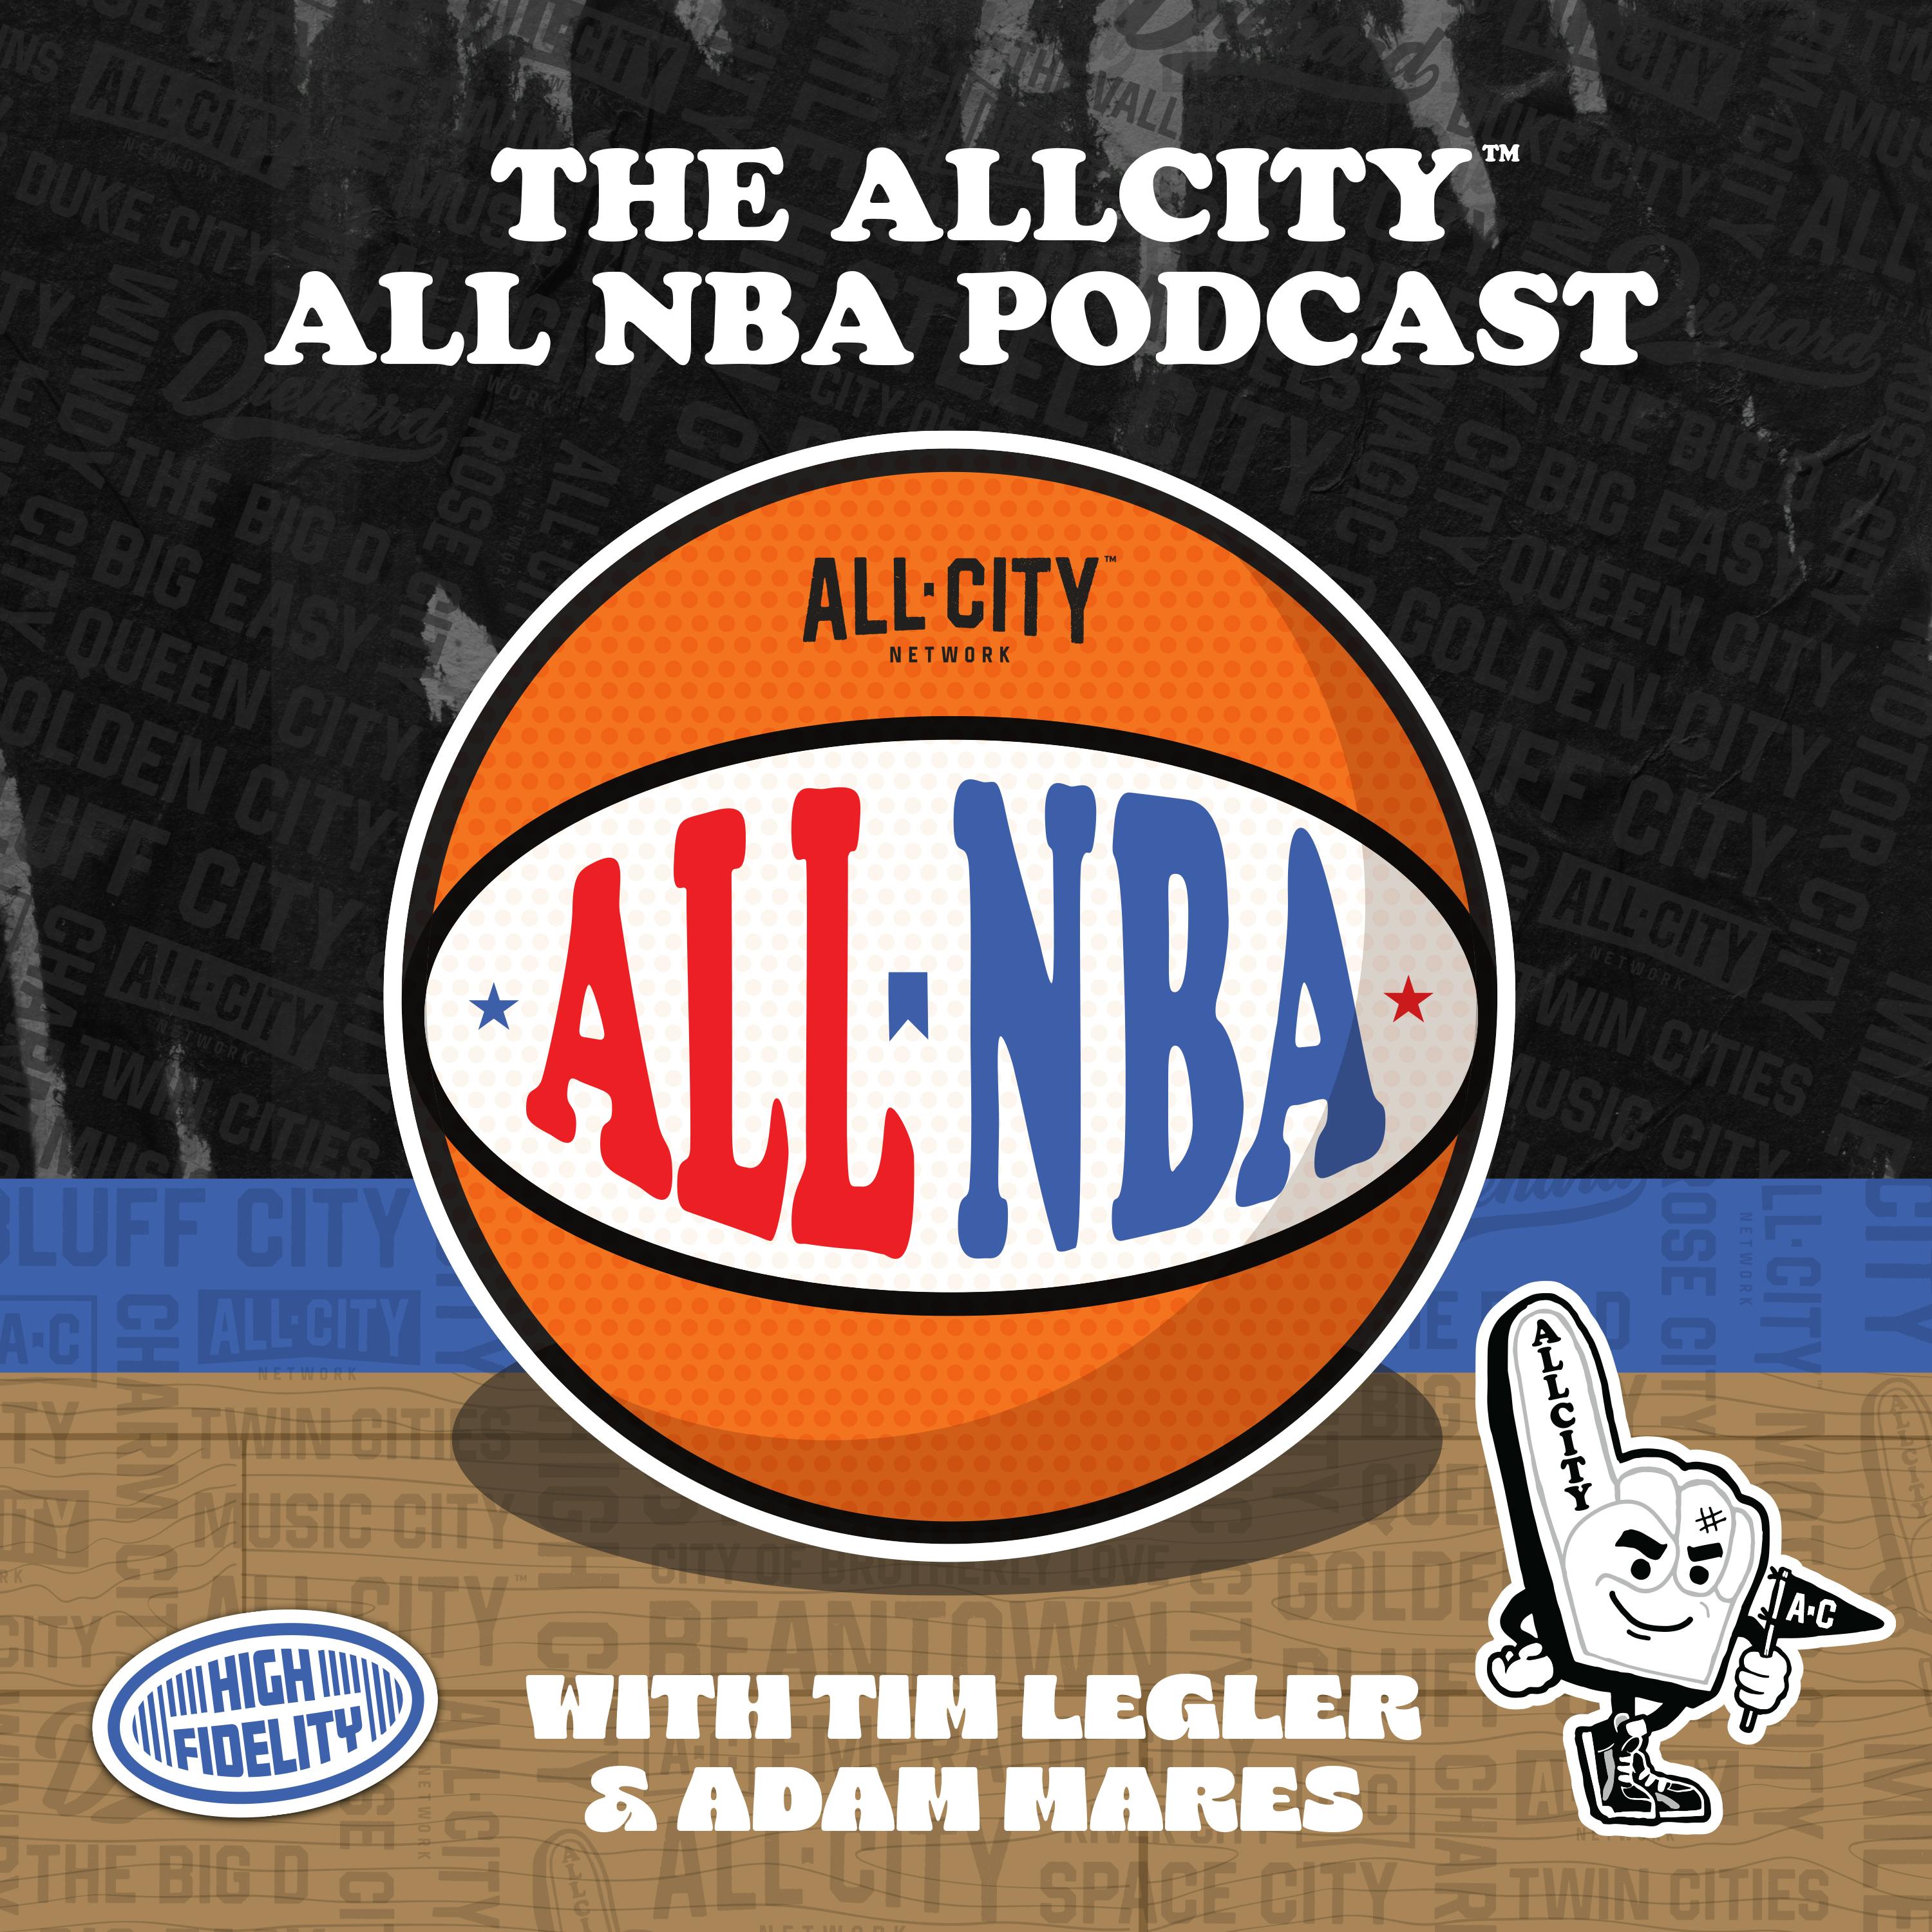 The ALL NBA Podcast: NBA playoff contender tiers | Can anyone catch the Nuggets and Celtics?